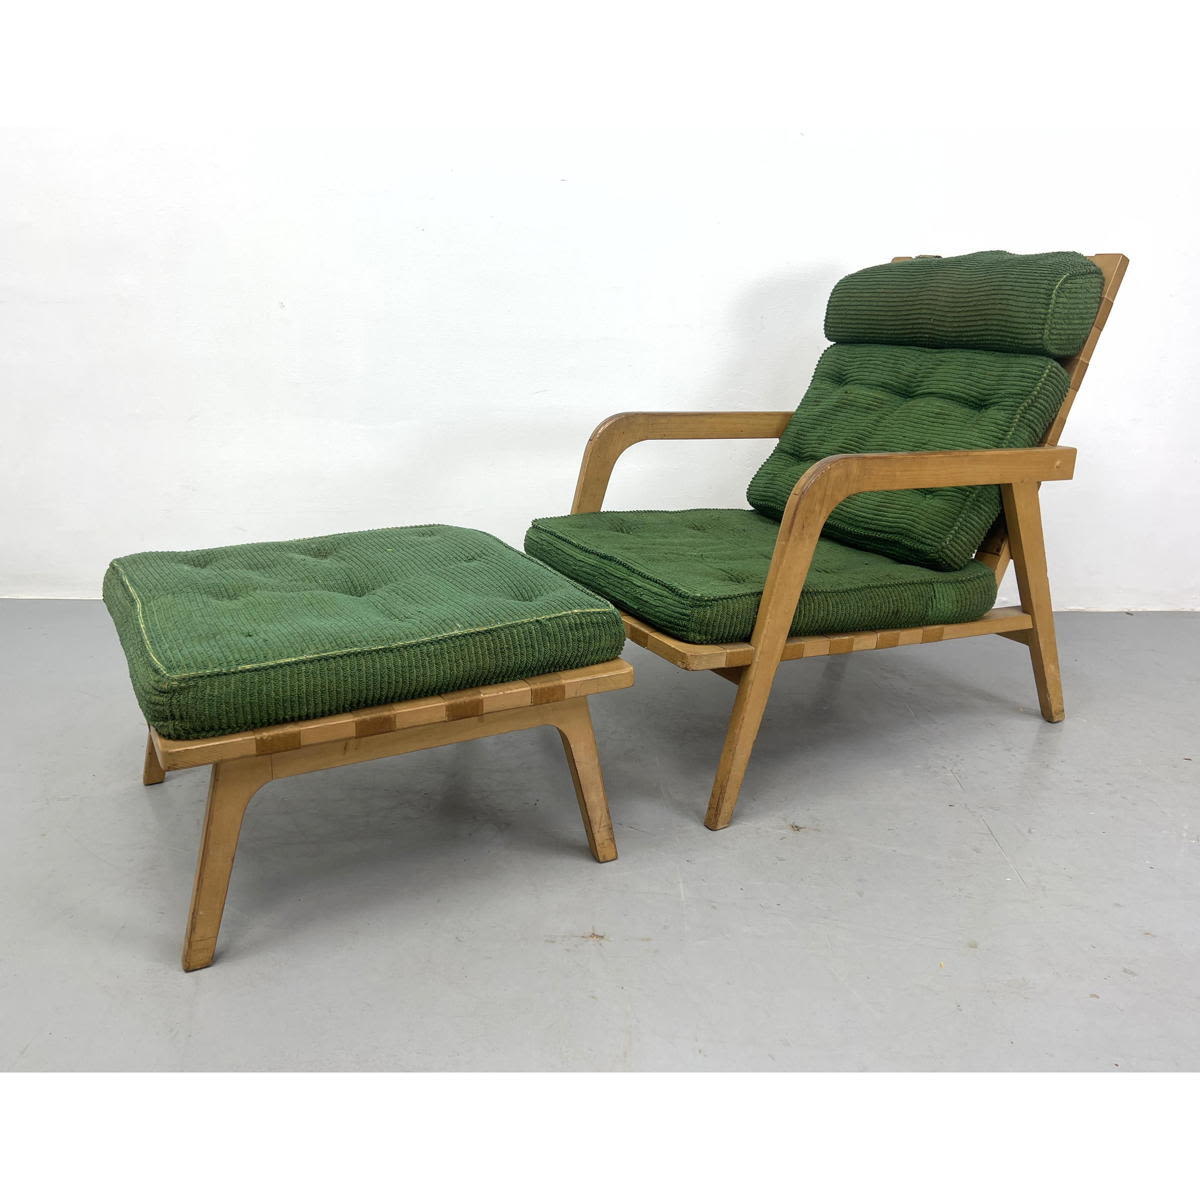 FICKS REED Modernist Lounge Chair